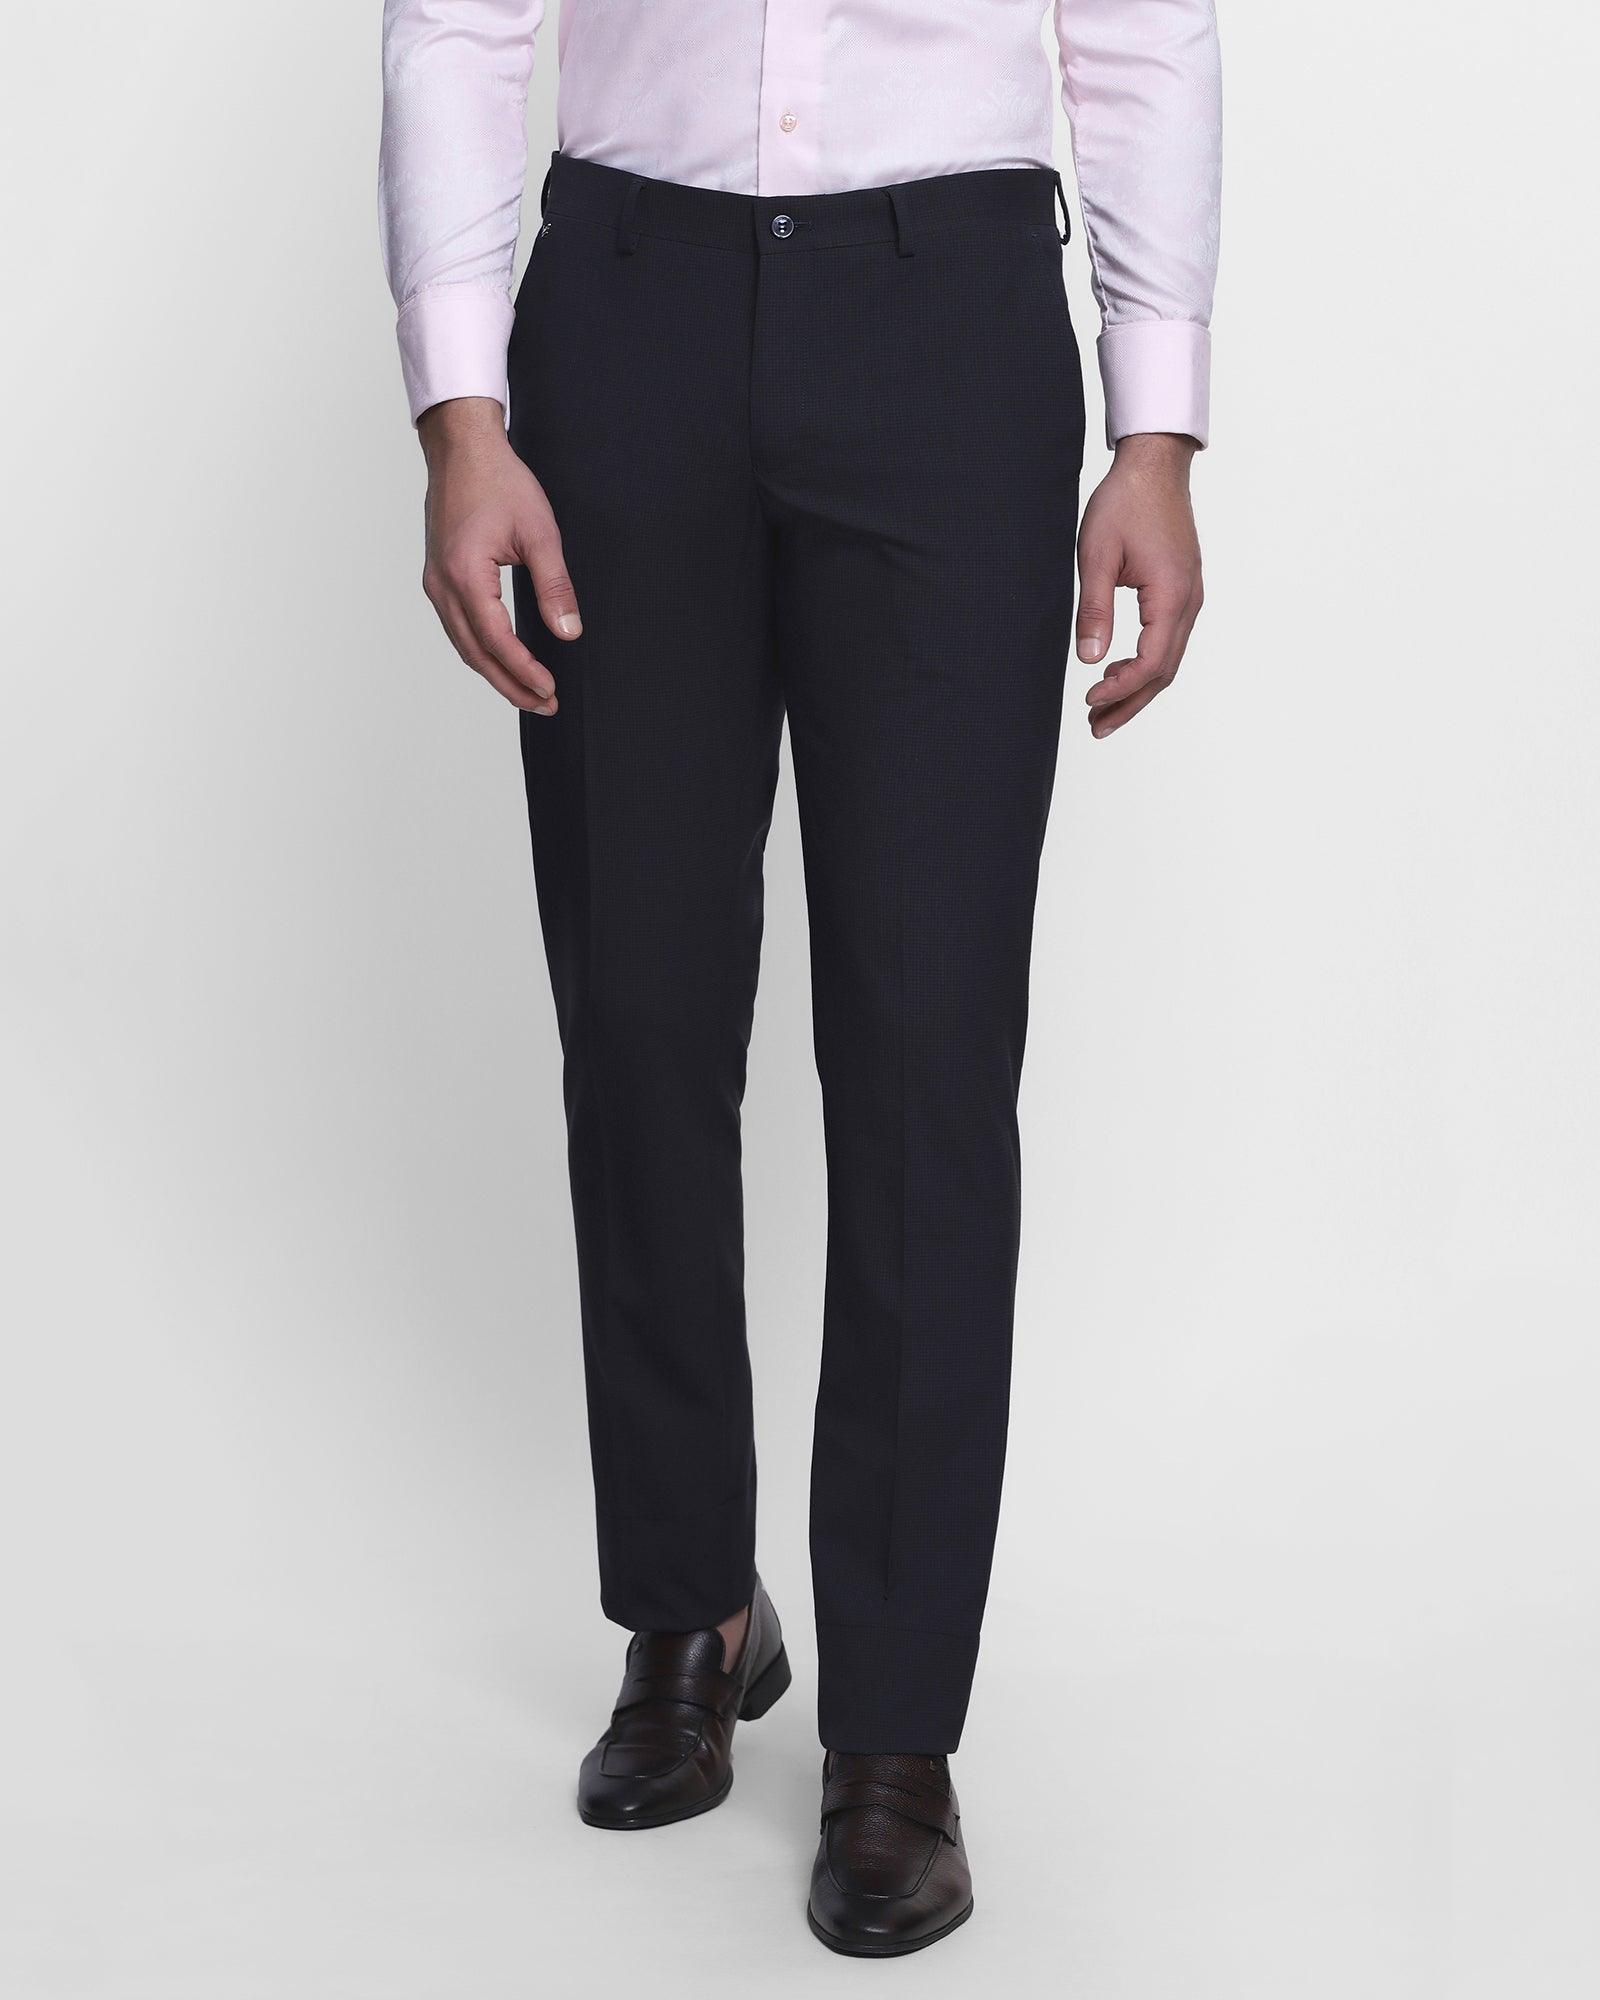 MIX BLEND FABRIC 18 COLOURS Men Black Formal Pant, Slim Fit at Rs 290 in  Ahmedabad